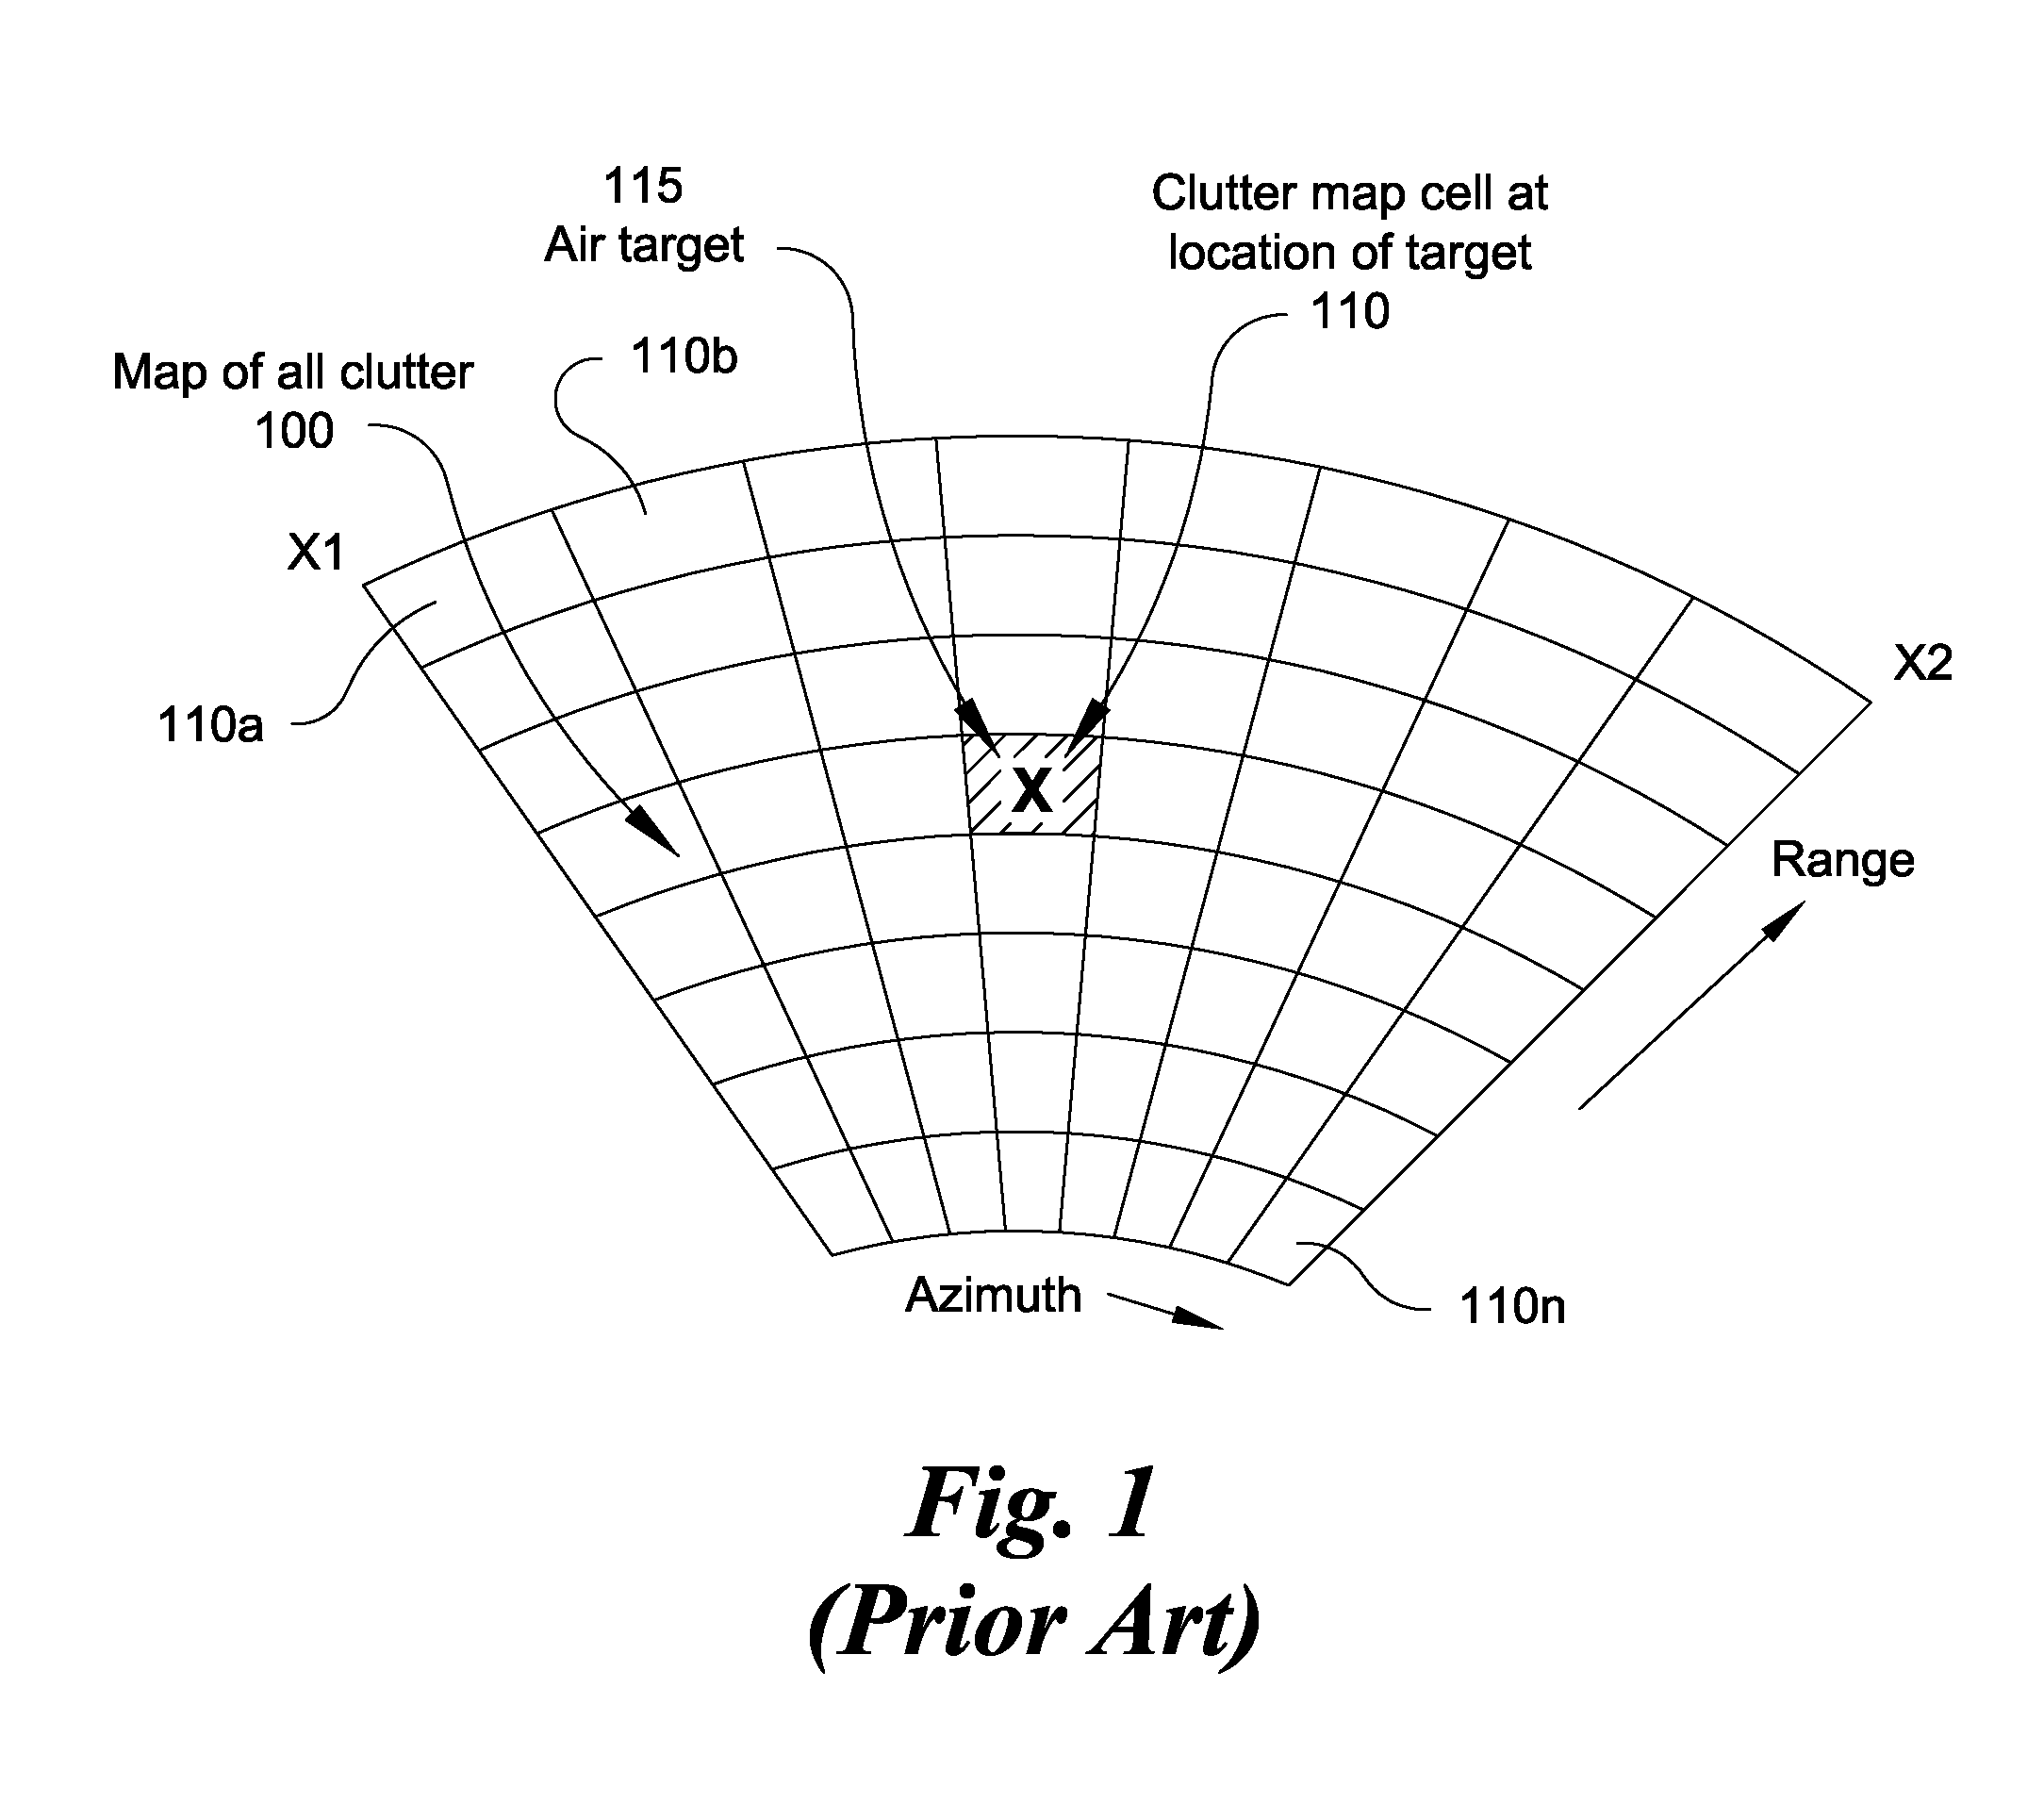 Method and apparatus  for radar surveillance and detection of sea targets